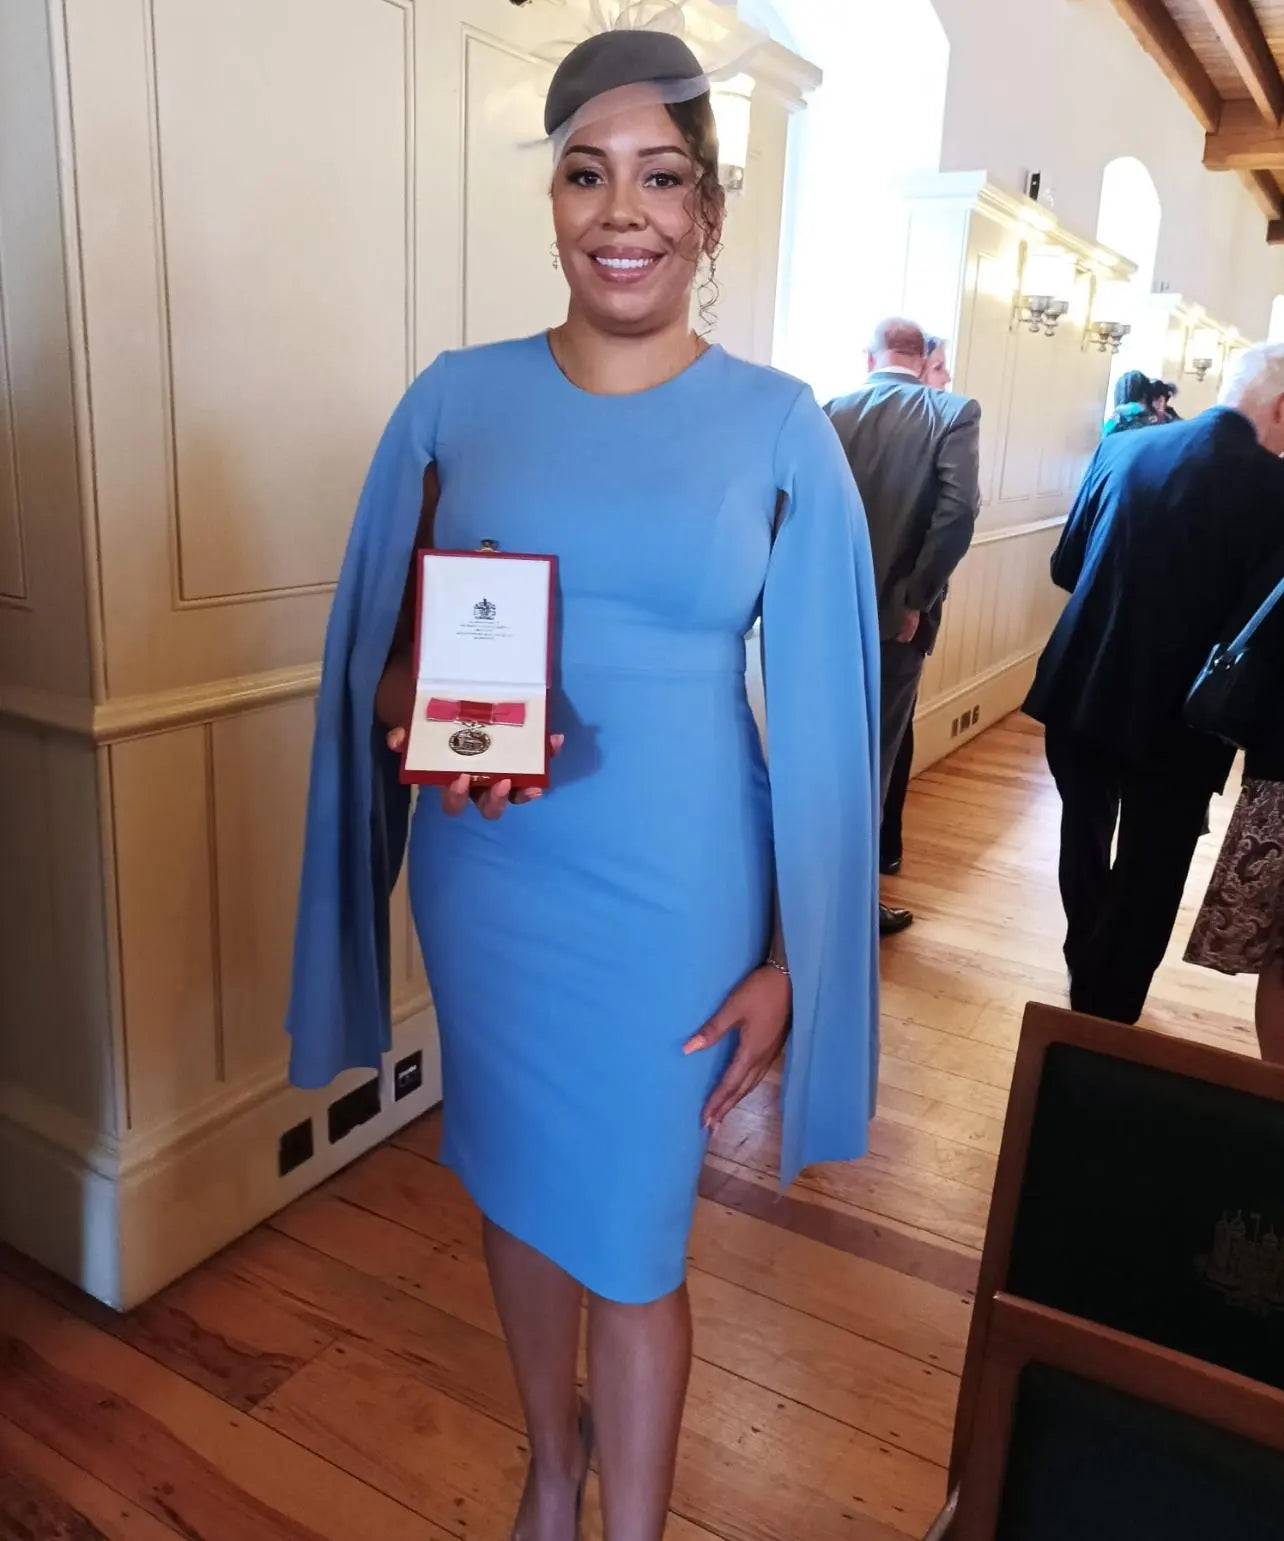 Honored and Empowered: Receiving a British Empire Medal as a Working Mum